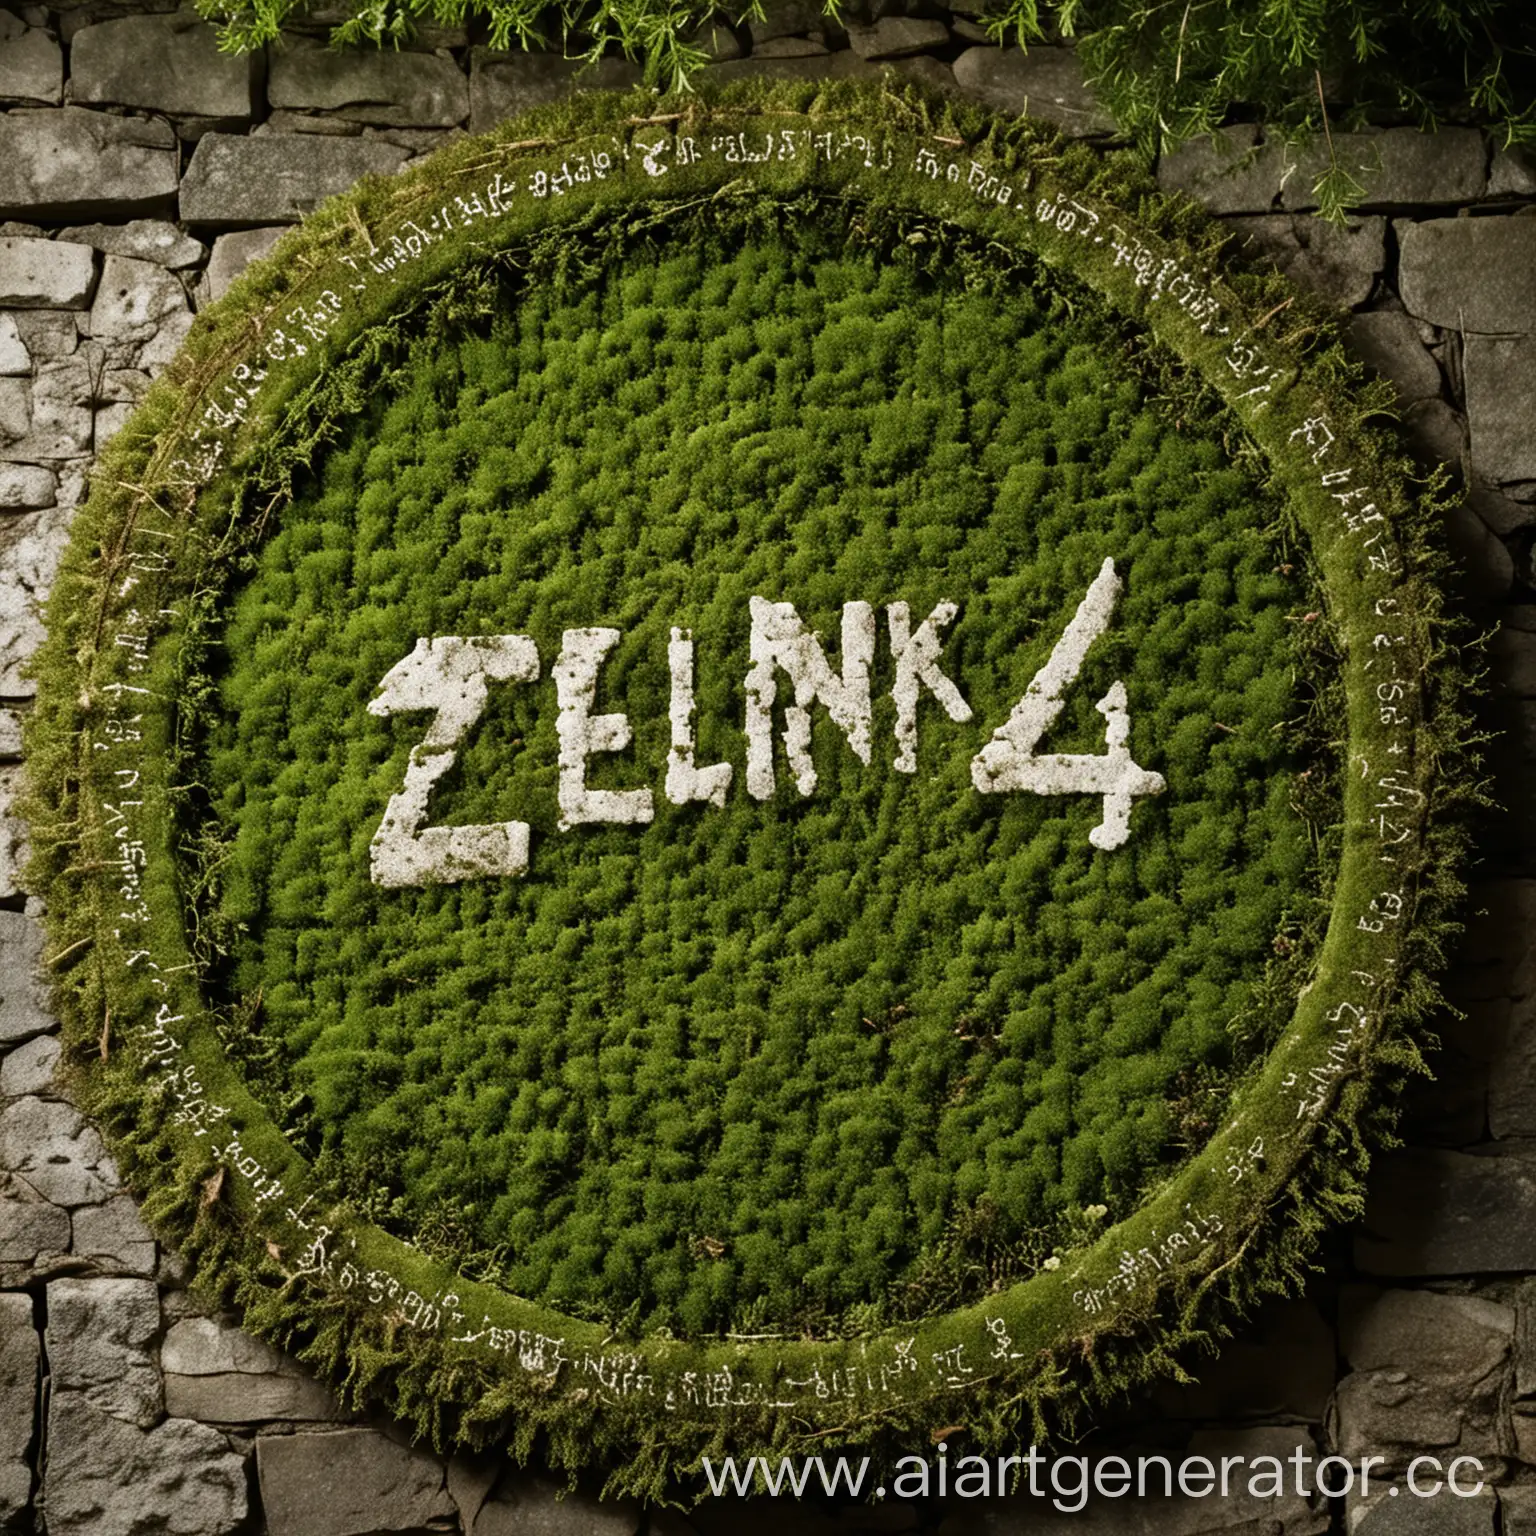  Circular moss panel with "Zelenniy54" inscription and lighting

(Note: I'm assuming "Zelenniy54" is not a recognized English word, so I translated it based on the given context. The rest of the input was already in English.)